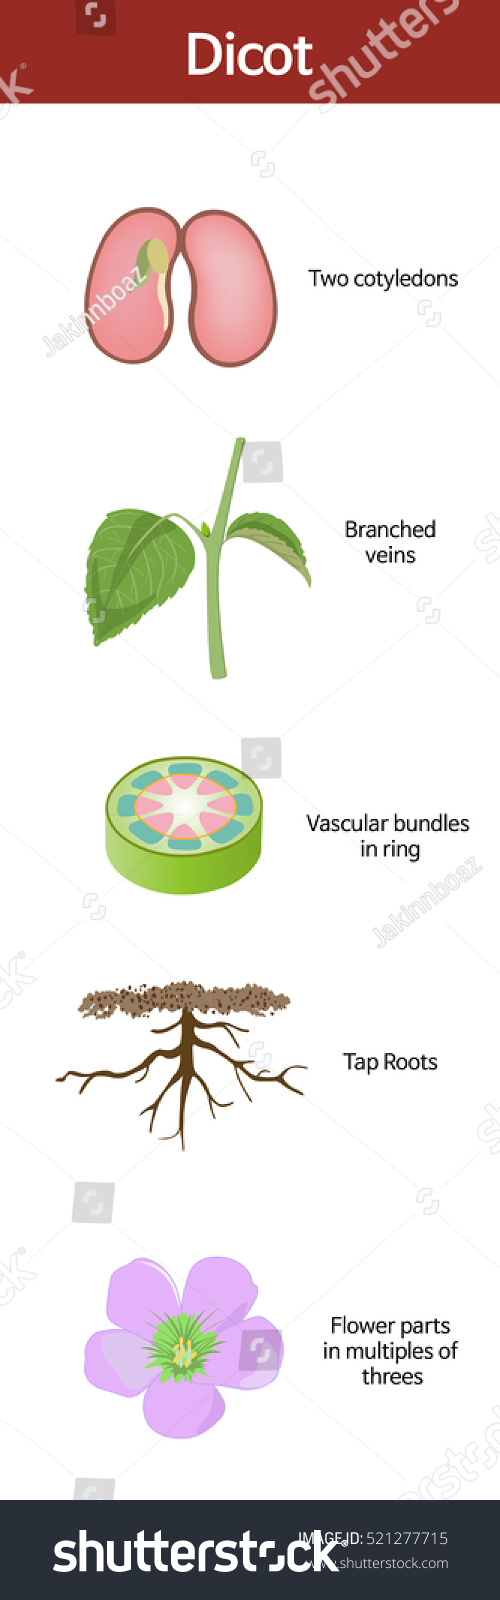 A picture summarizing the features of a dicot.